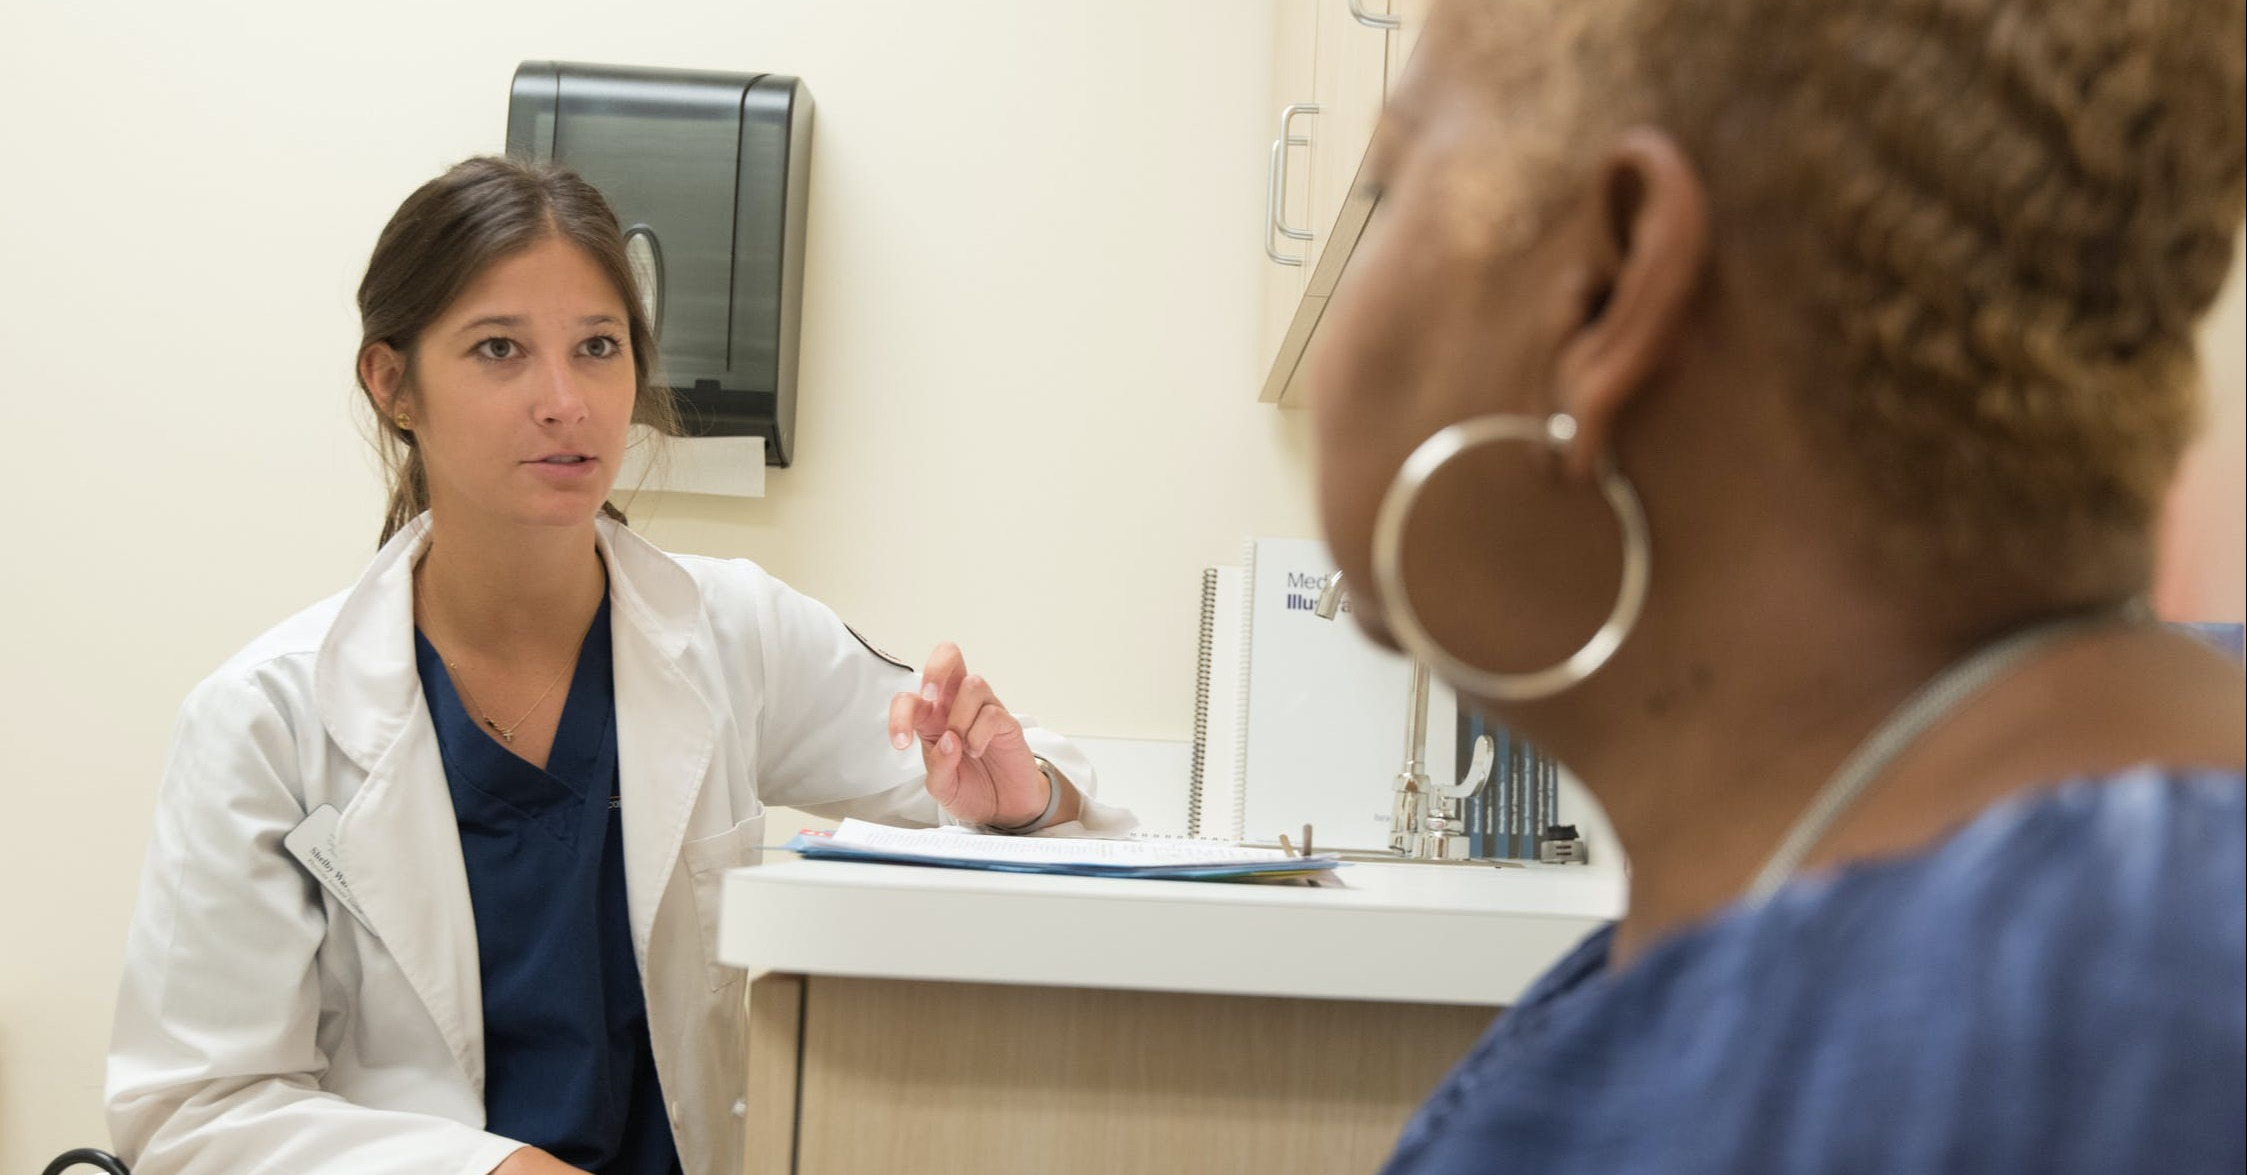 Physician Assistant vs. Doctor: What Is the Difference?